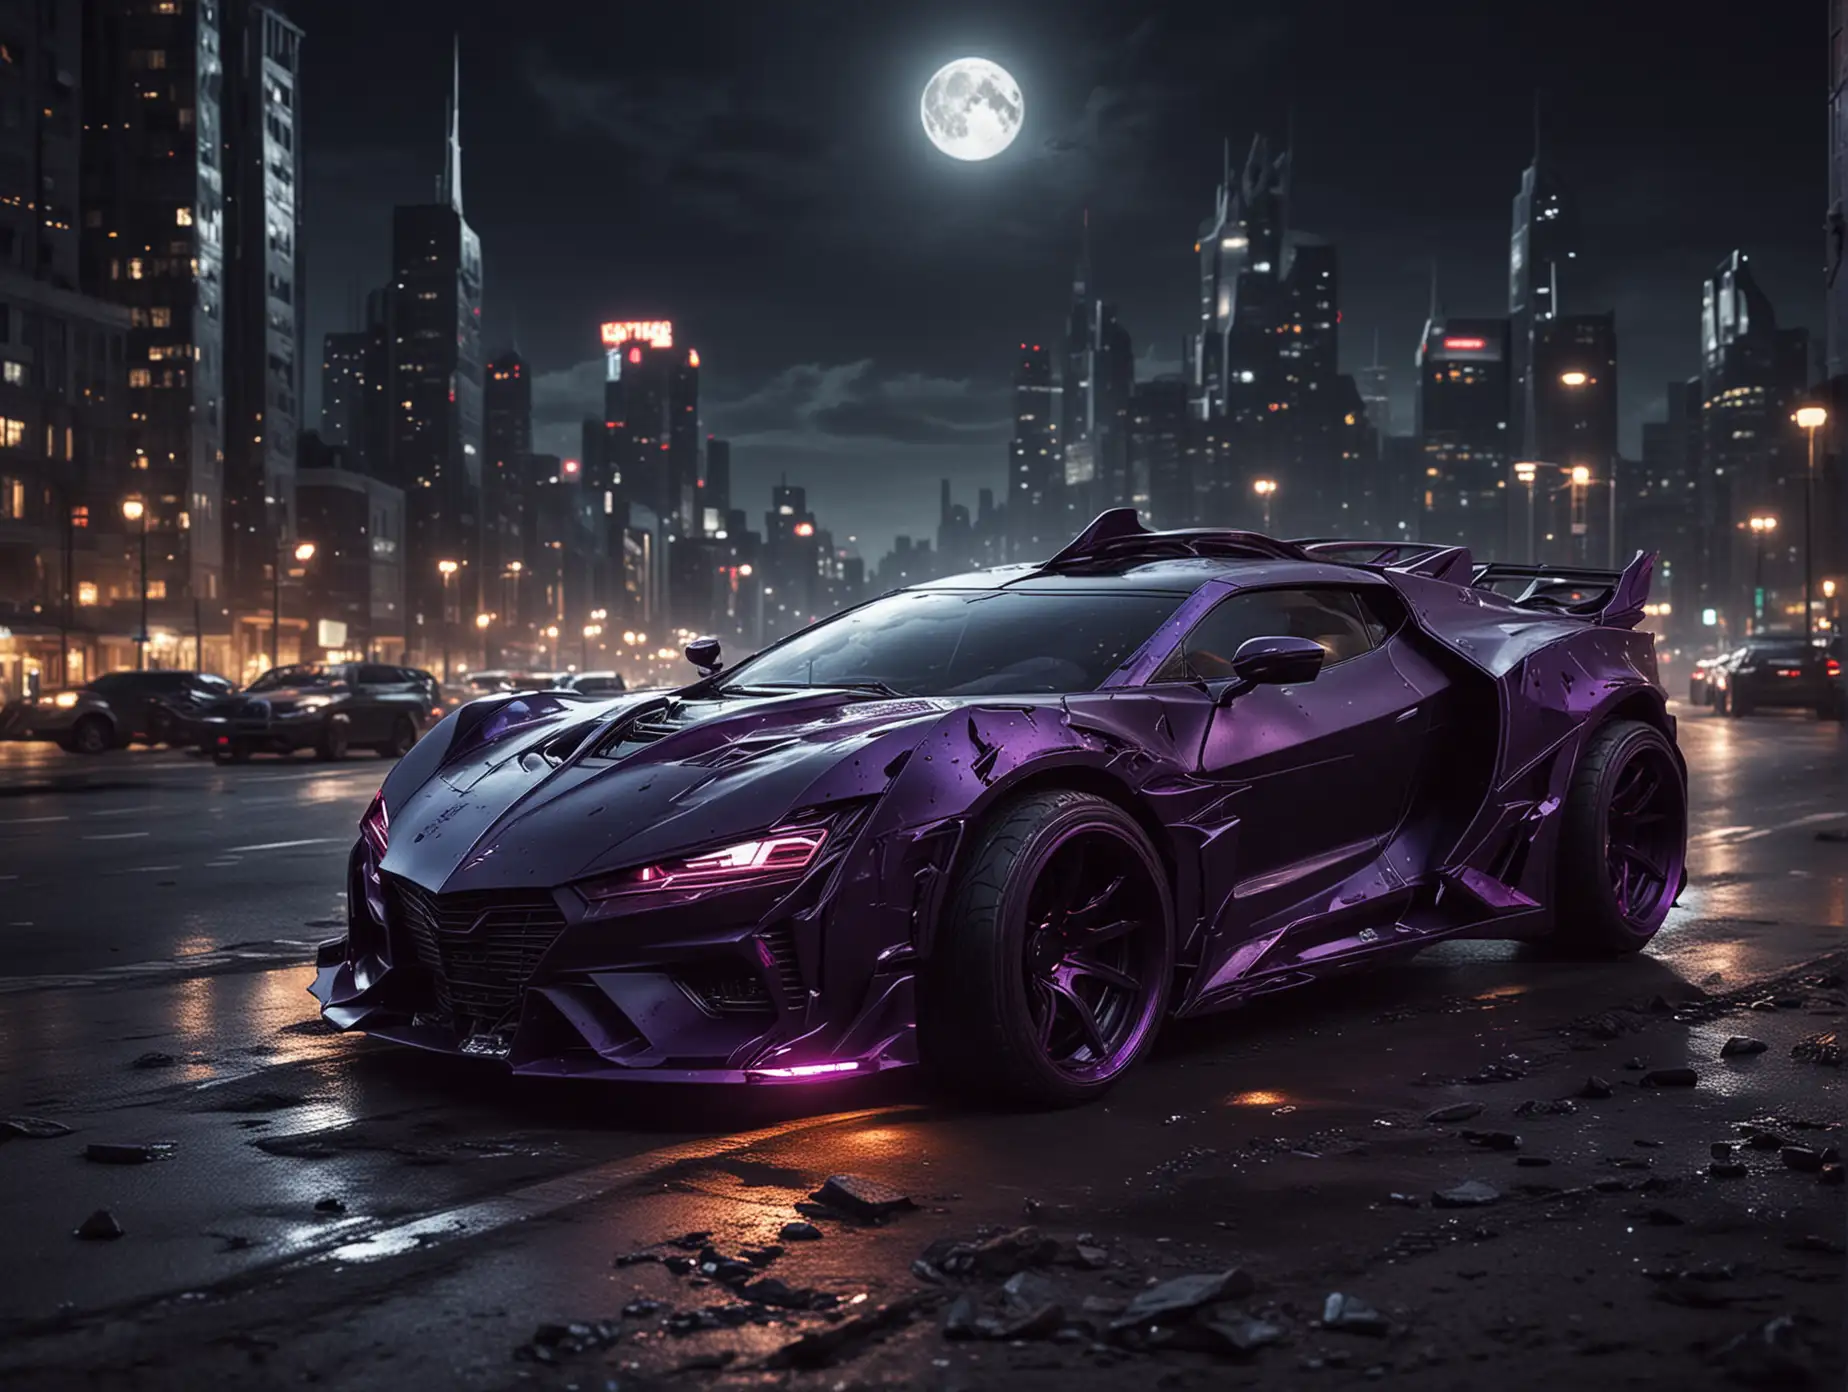 Futuristic-Sports-Cars-Lion-Tiger-Batman-and-Spiderman-Racing-Downhill-in-Moonlit-Cityscape